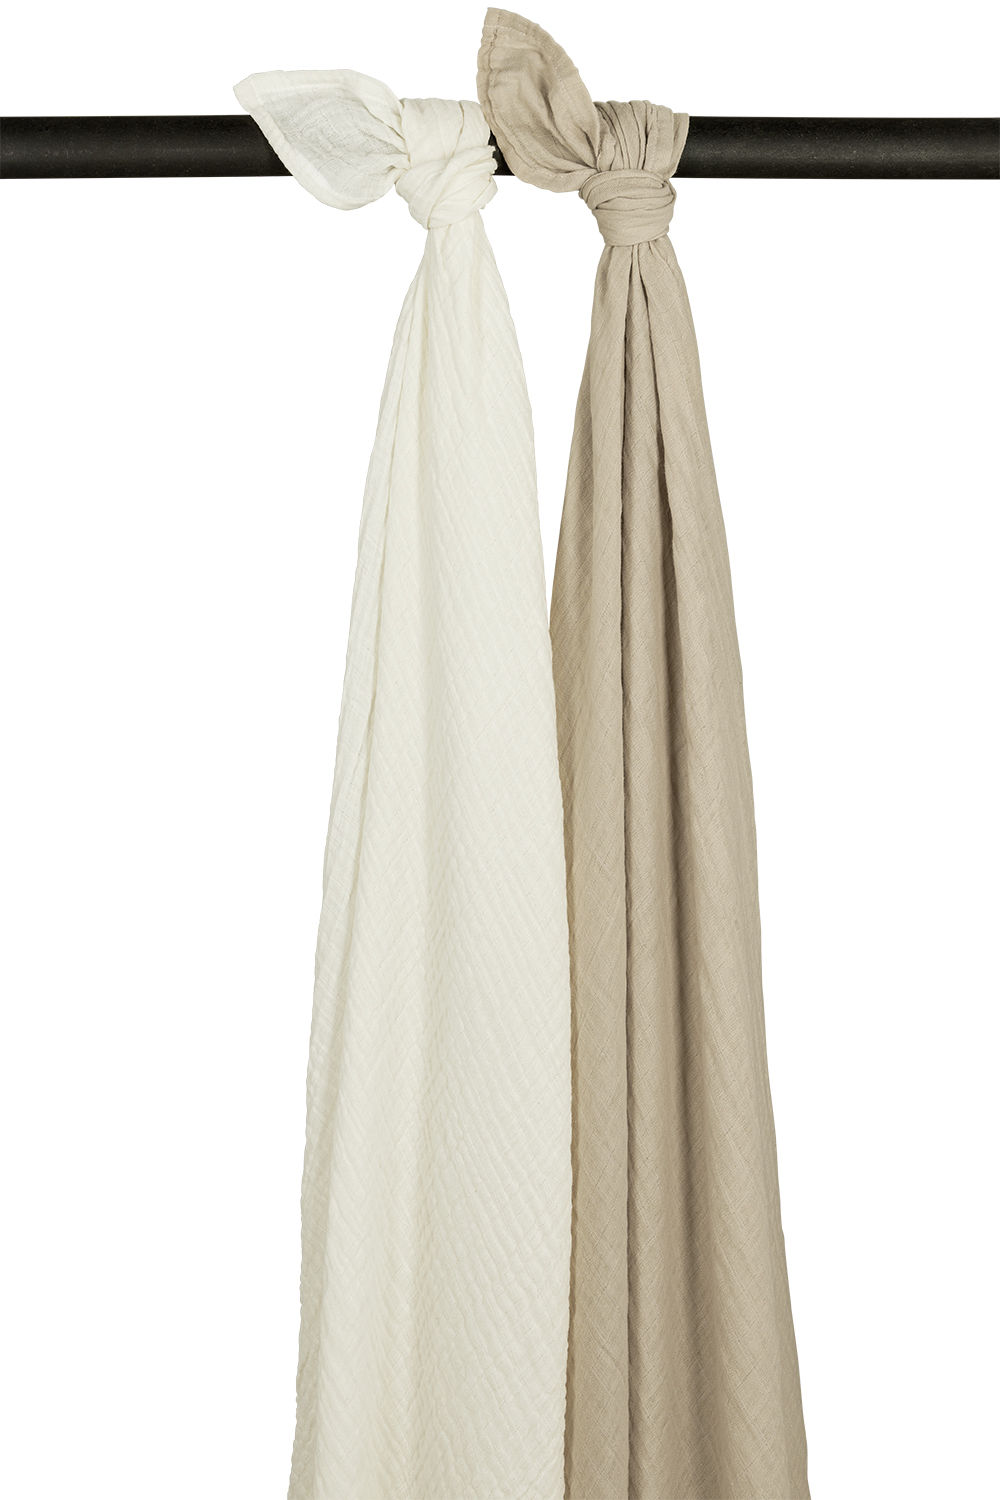 Swaddle 2-pack pre-washed muslin Uni - offwhite/sand - 120x120cm